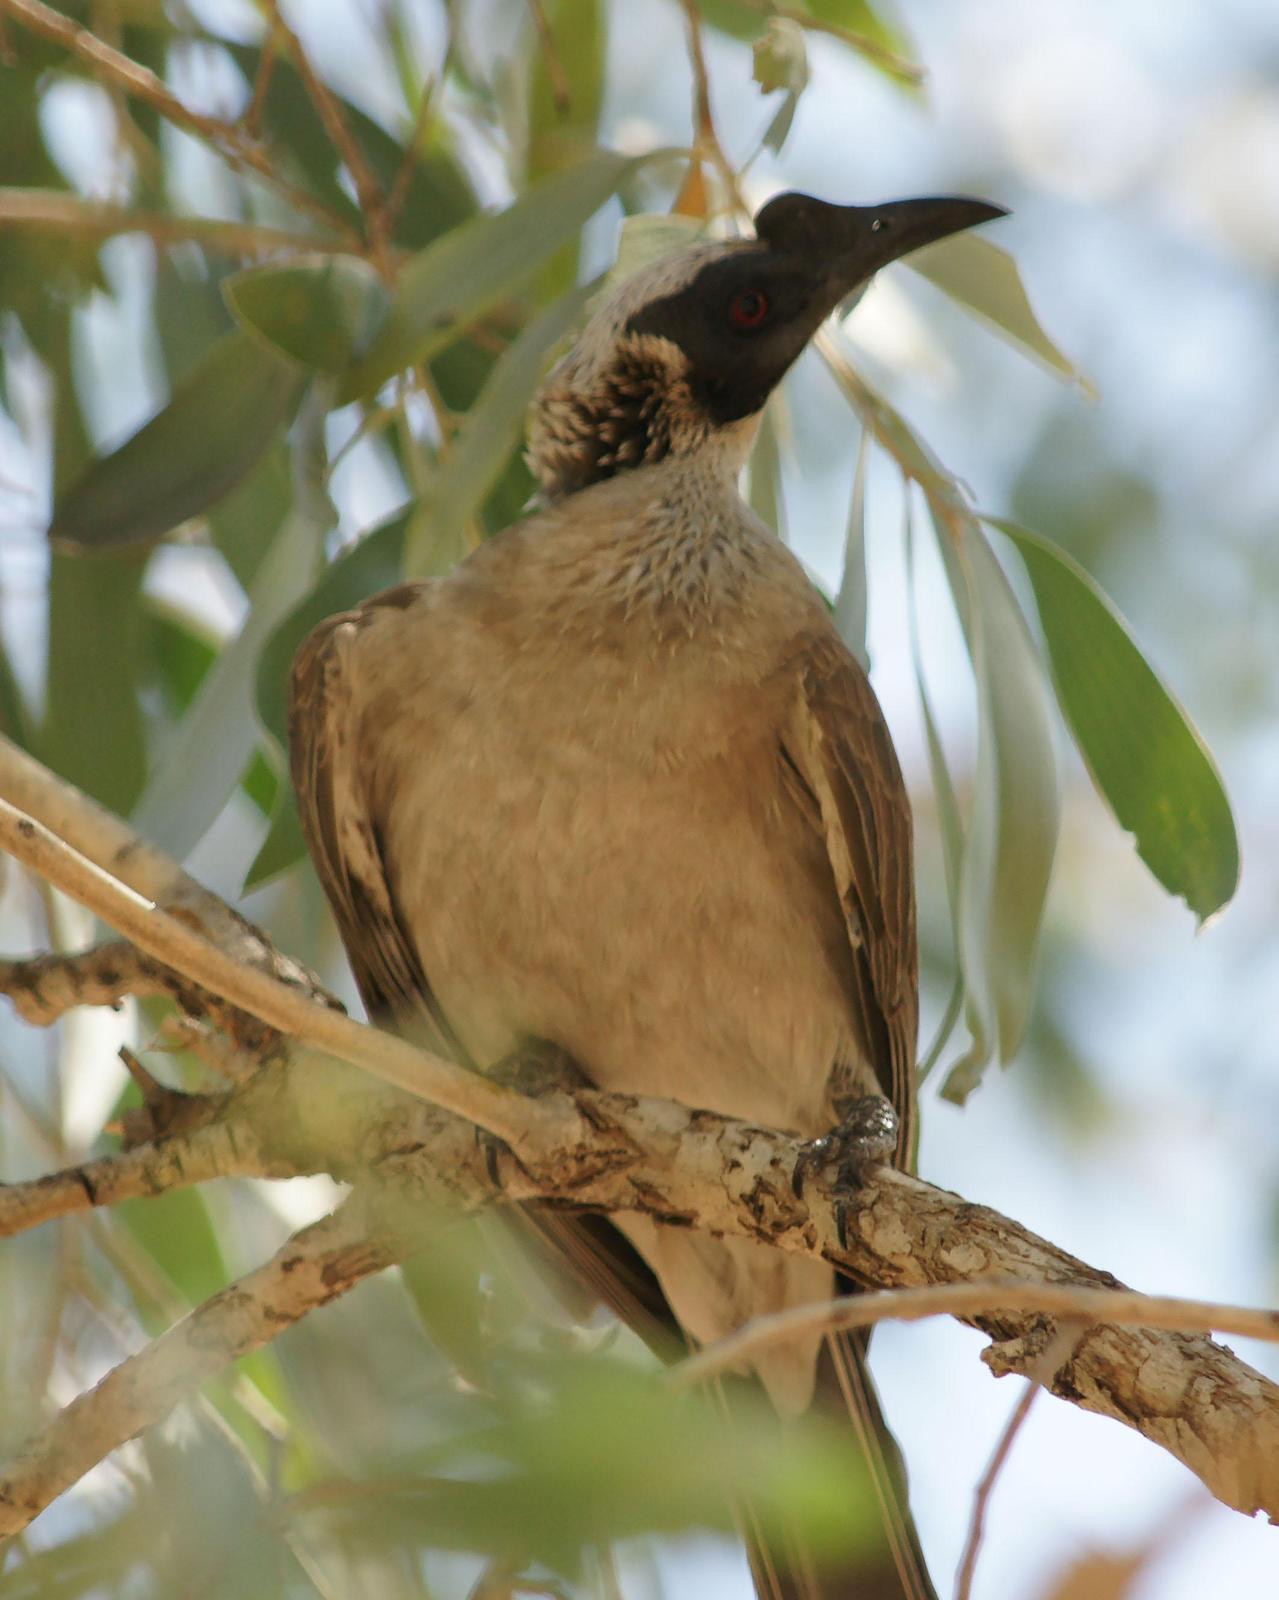 Silver-crowned Friarbird Photo by Steve Percival